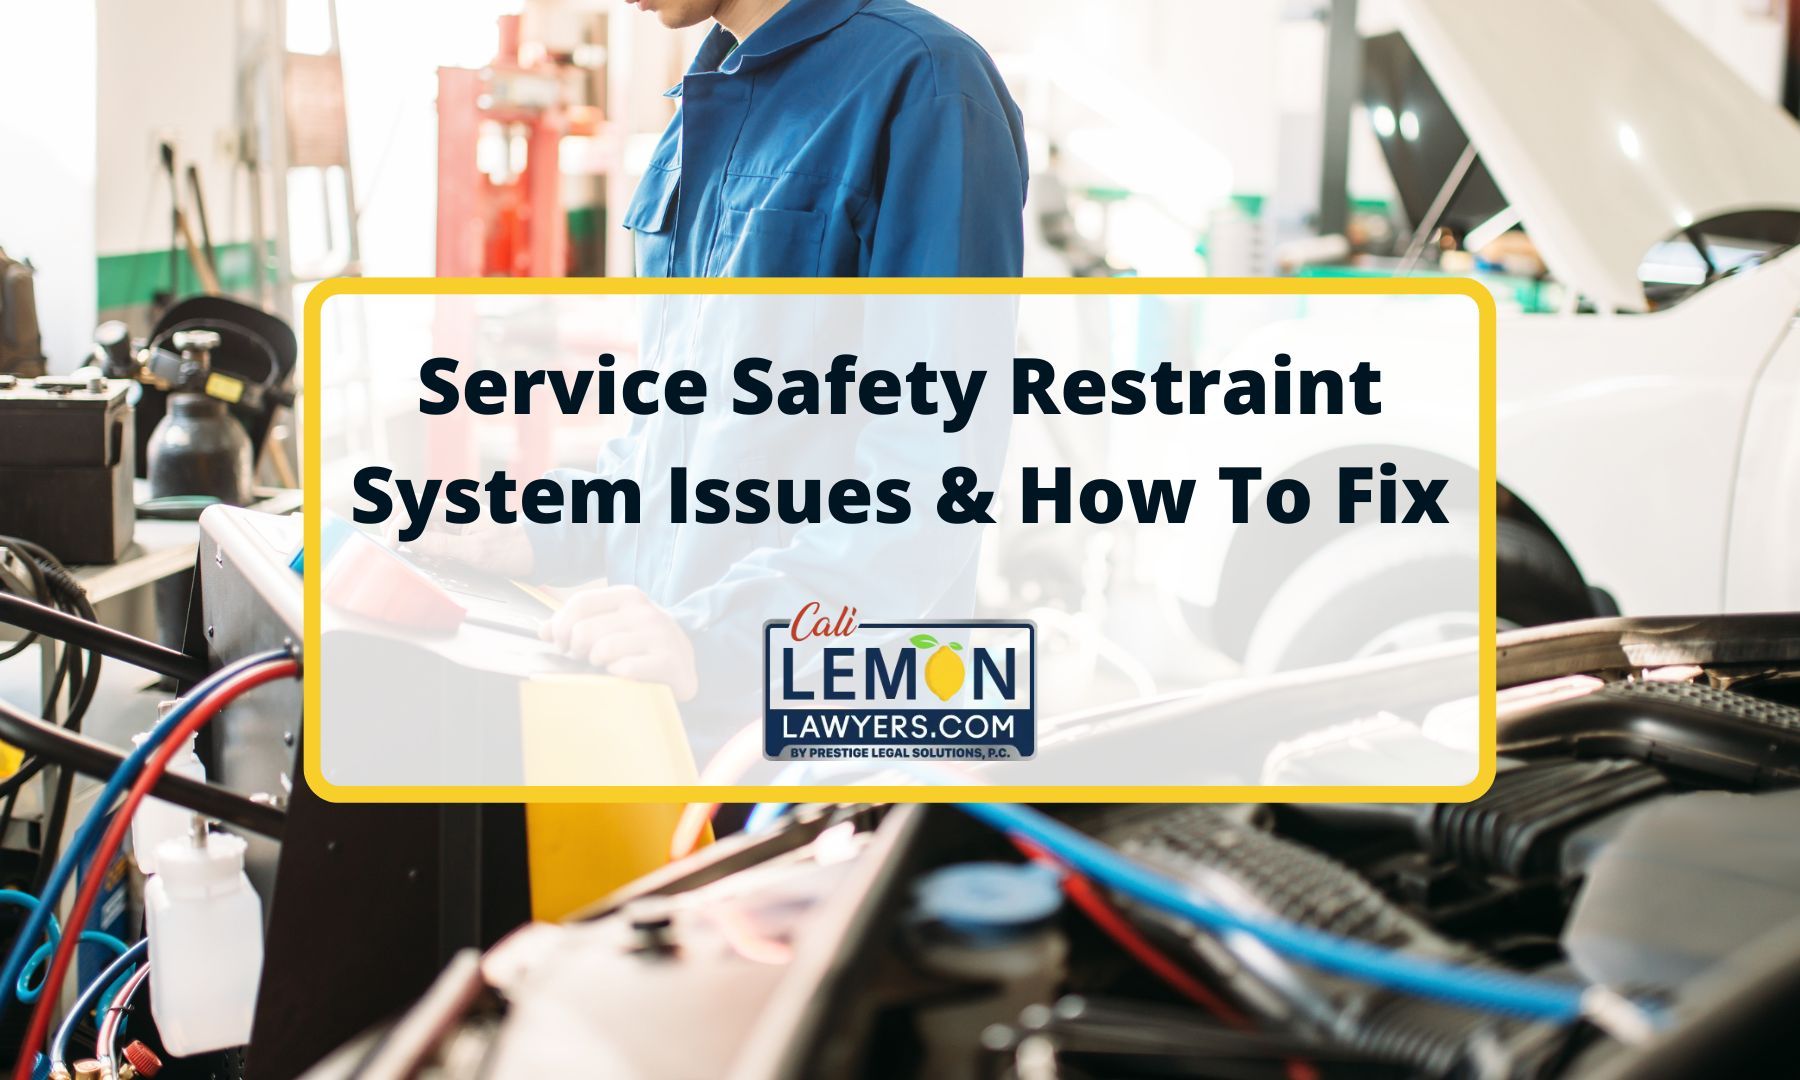 Service Safety Restraint System Issues & How To Fix